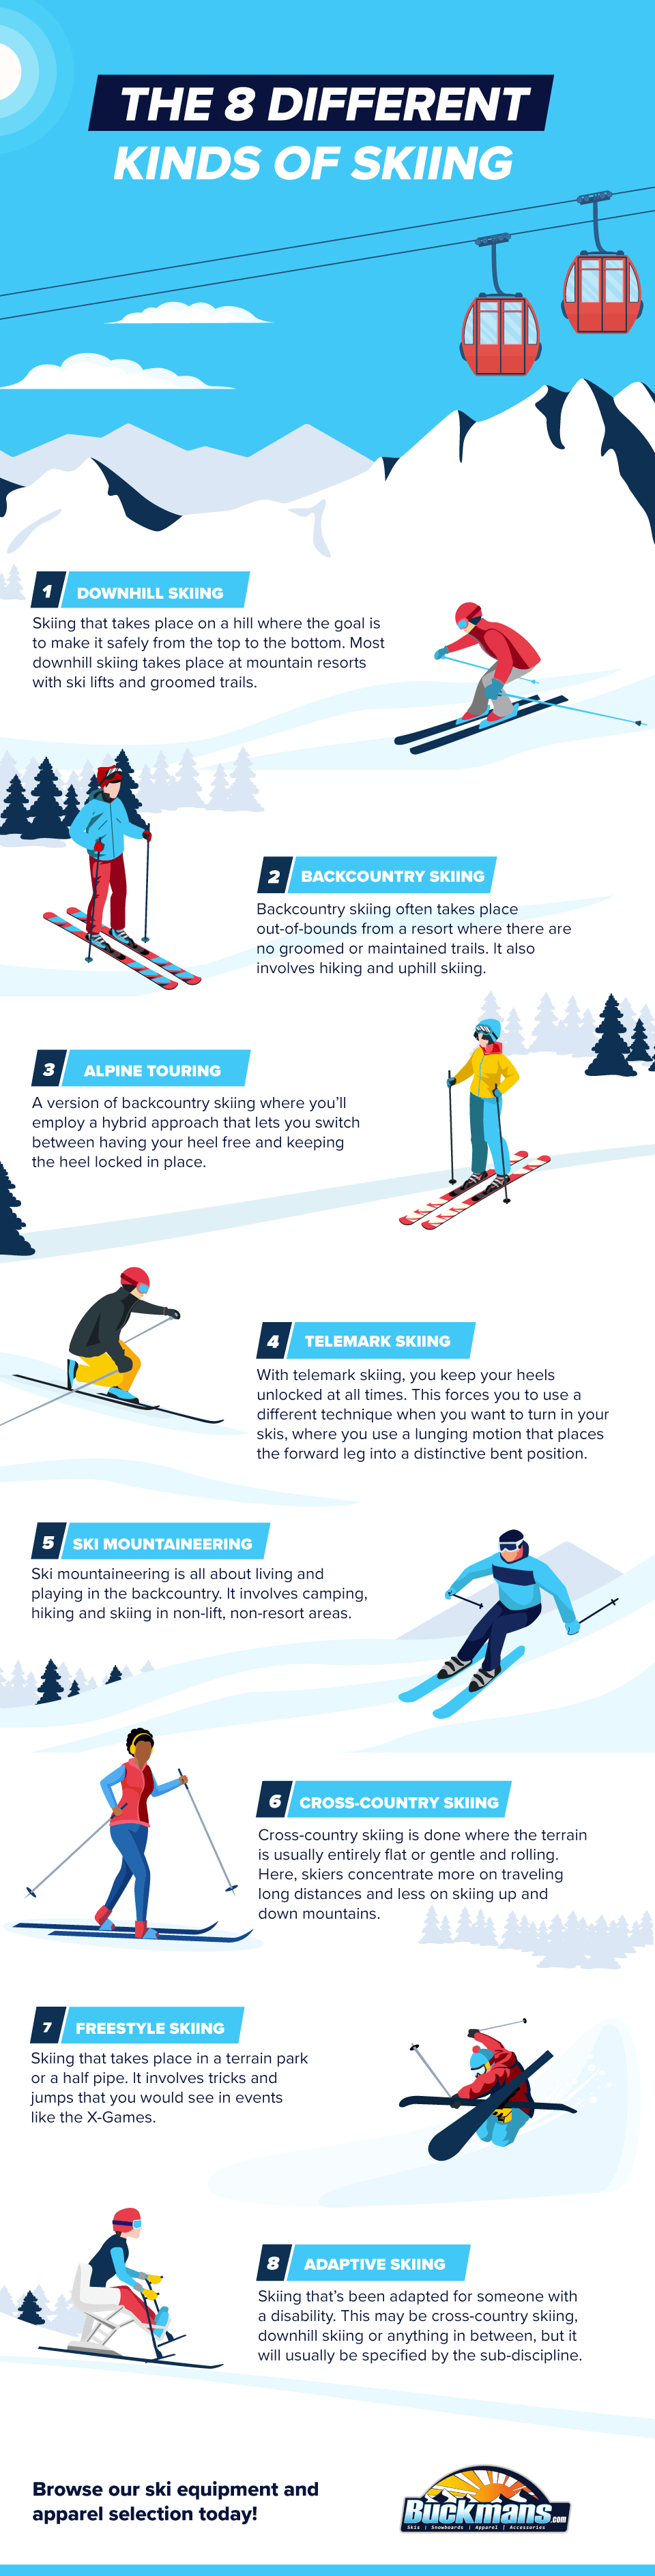 8 Different Types of Skiing